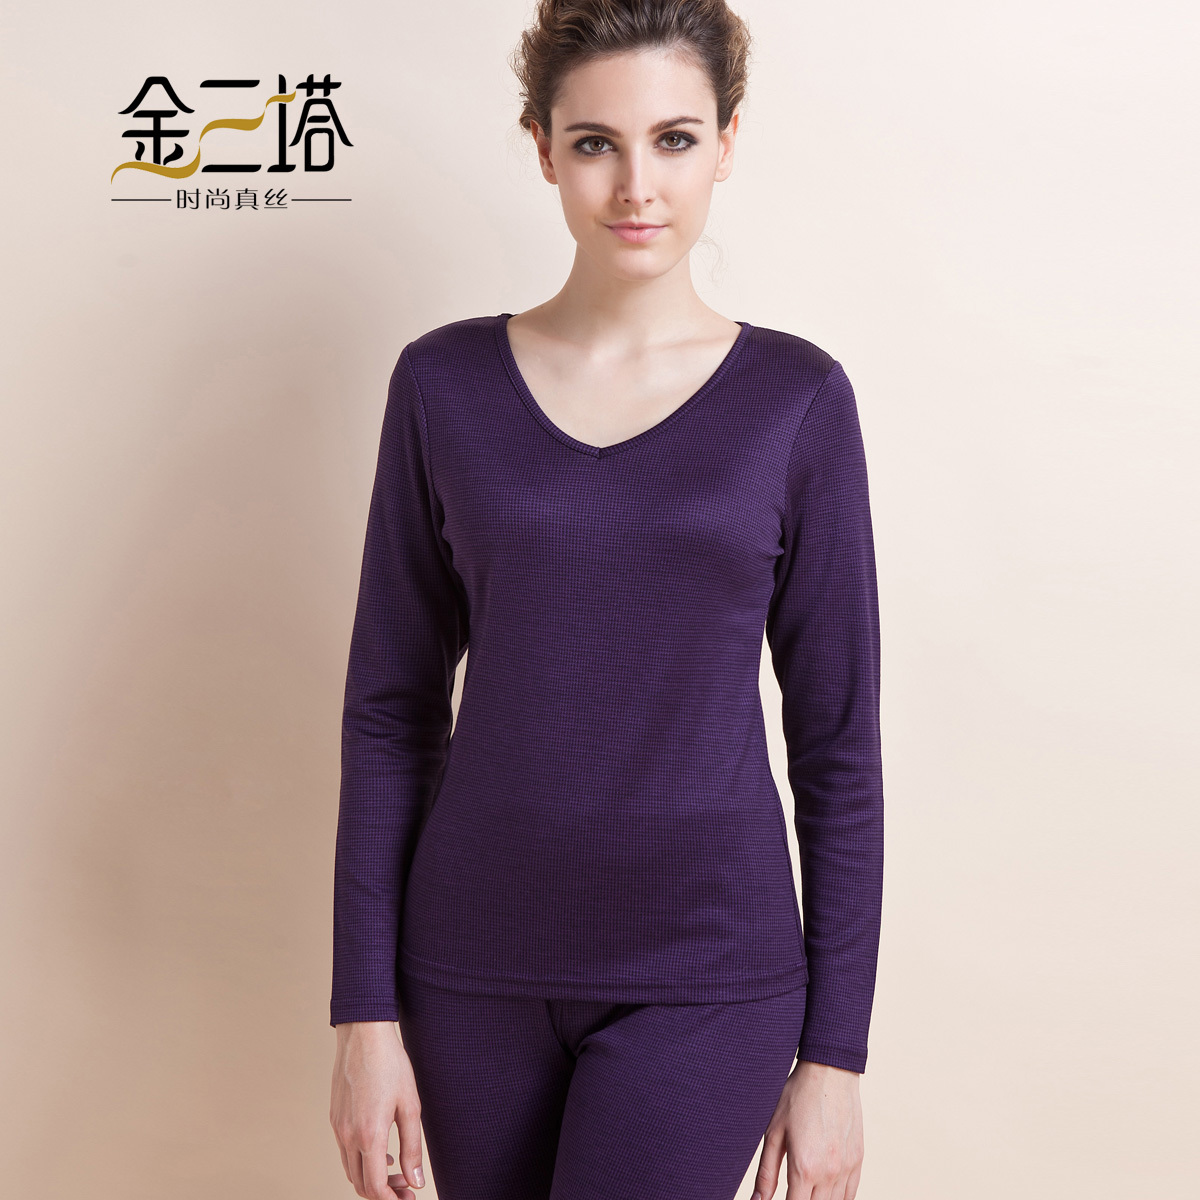 Compare Prices on Silk Thermals Women- Online Shopping/Buy Low ...